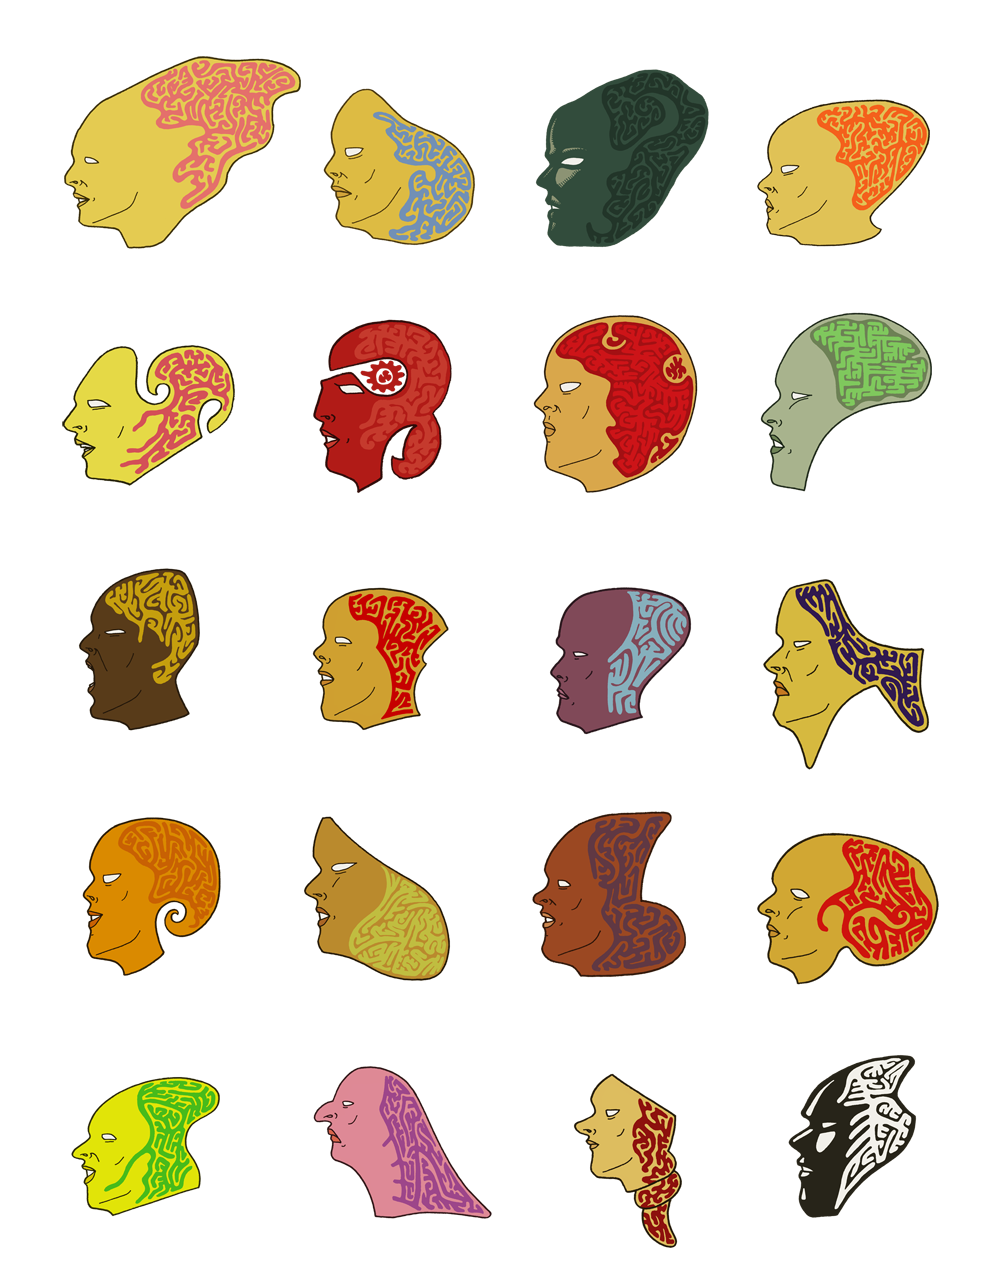 A series of illustrations showing the human profile and the labyrinth of the mind.